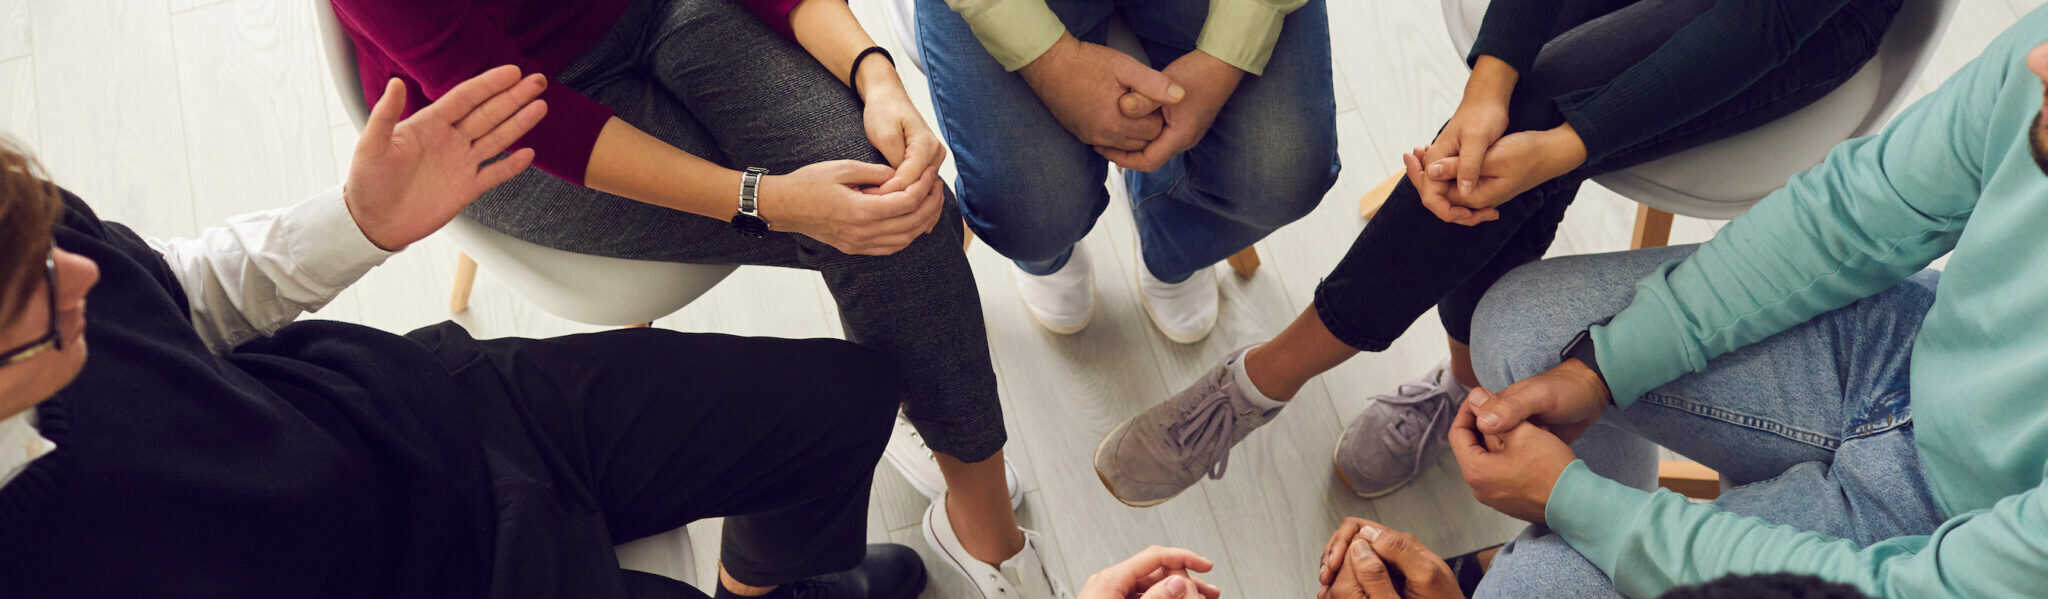 Top view of diverse people sitting in a close circle and talking to a therapist. Cropped image of unidentified people receive help and support during a group therapy session. Concept of group therapy.